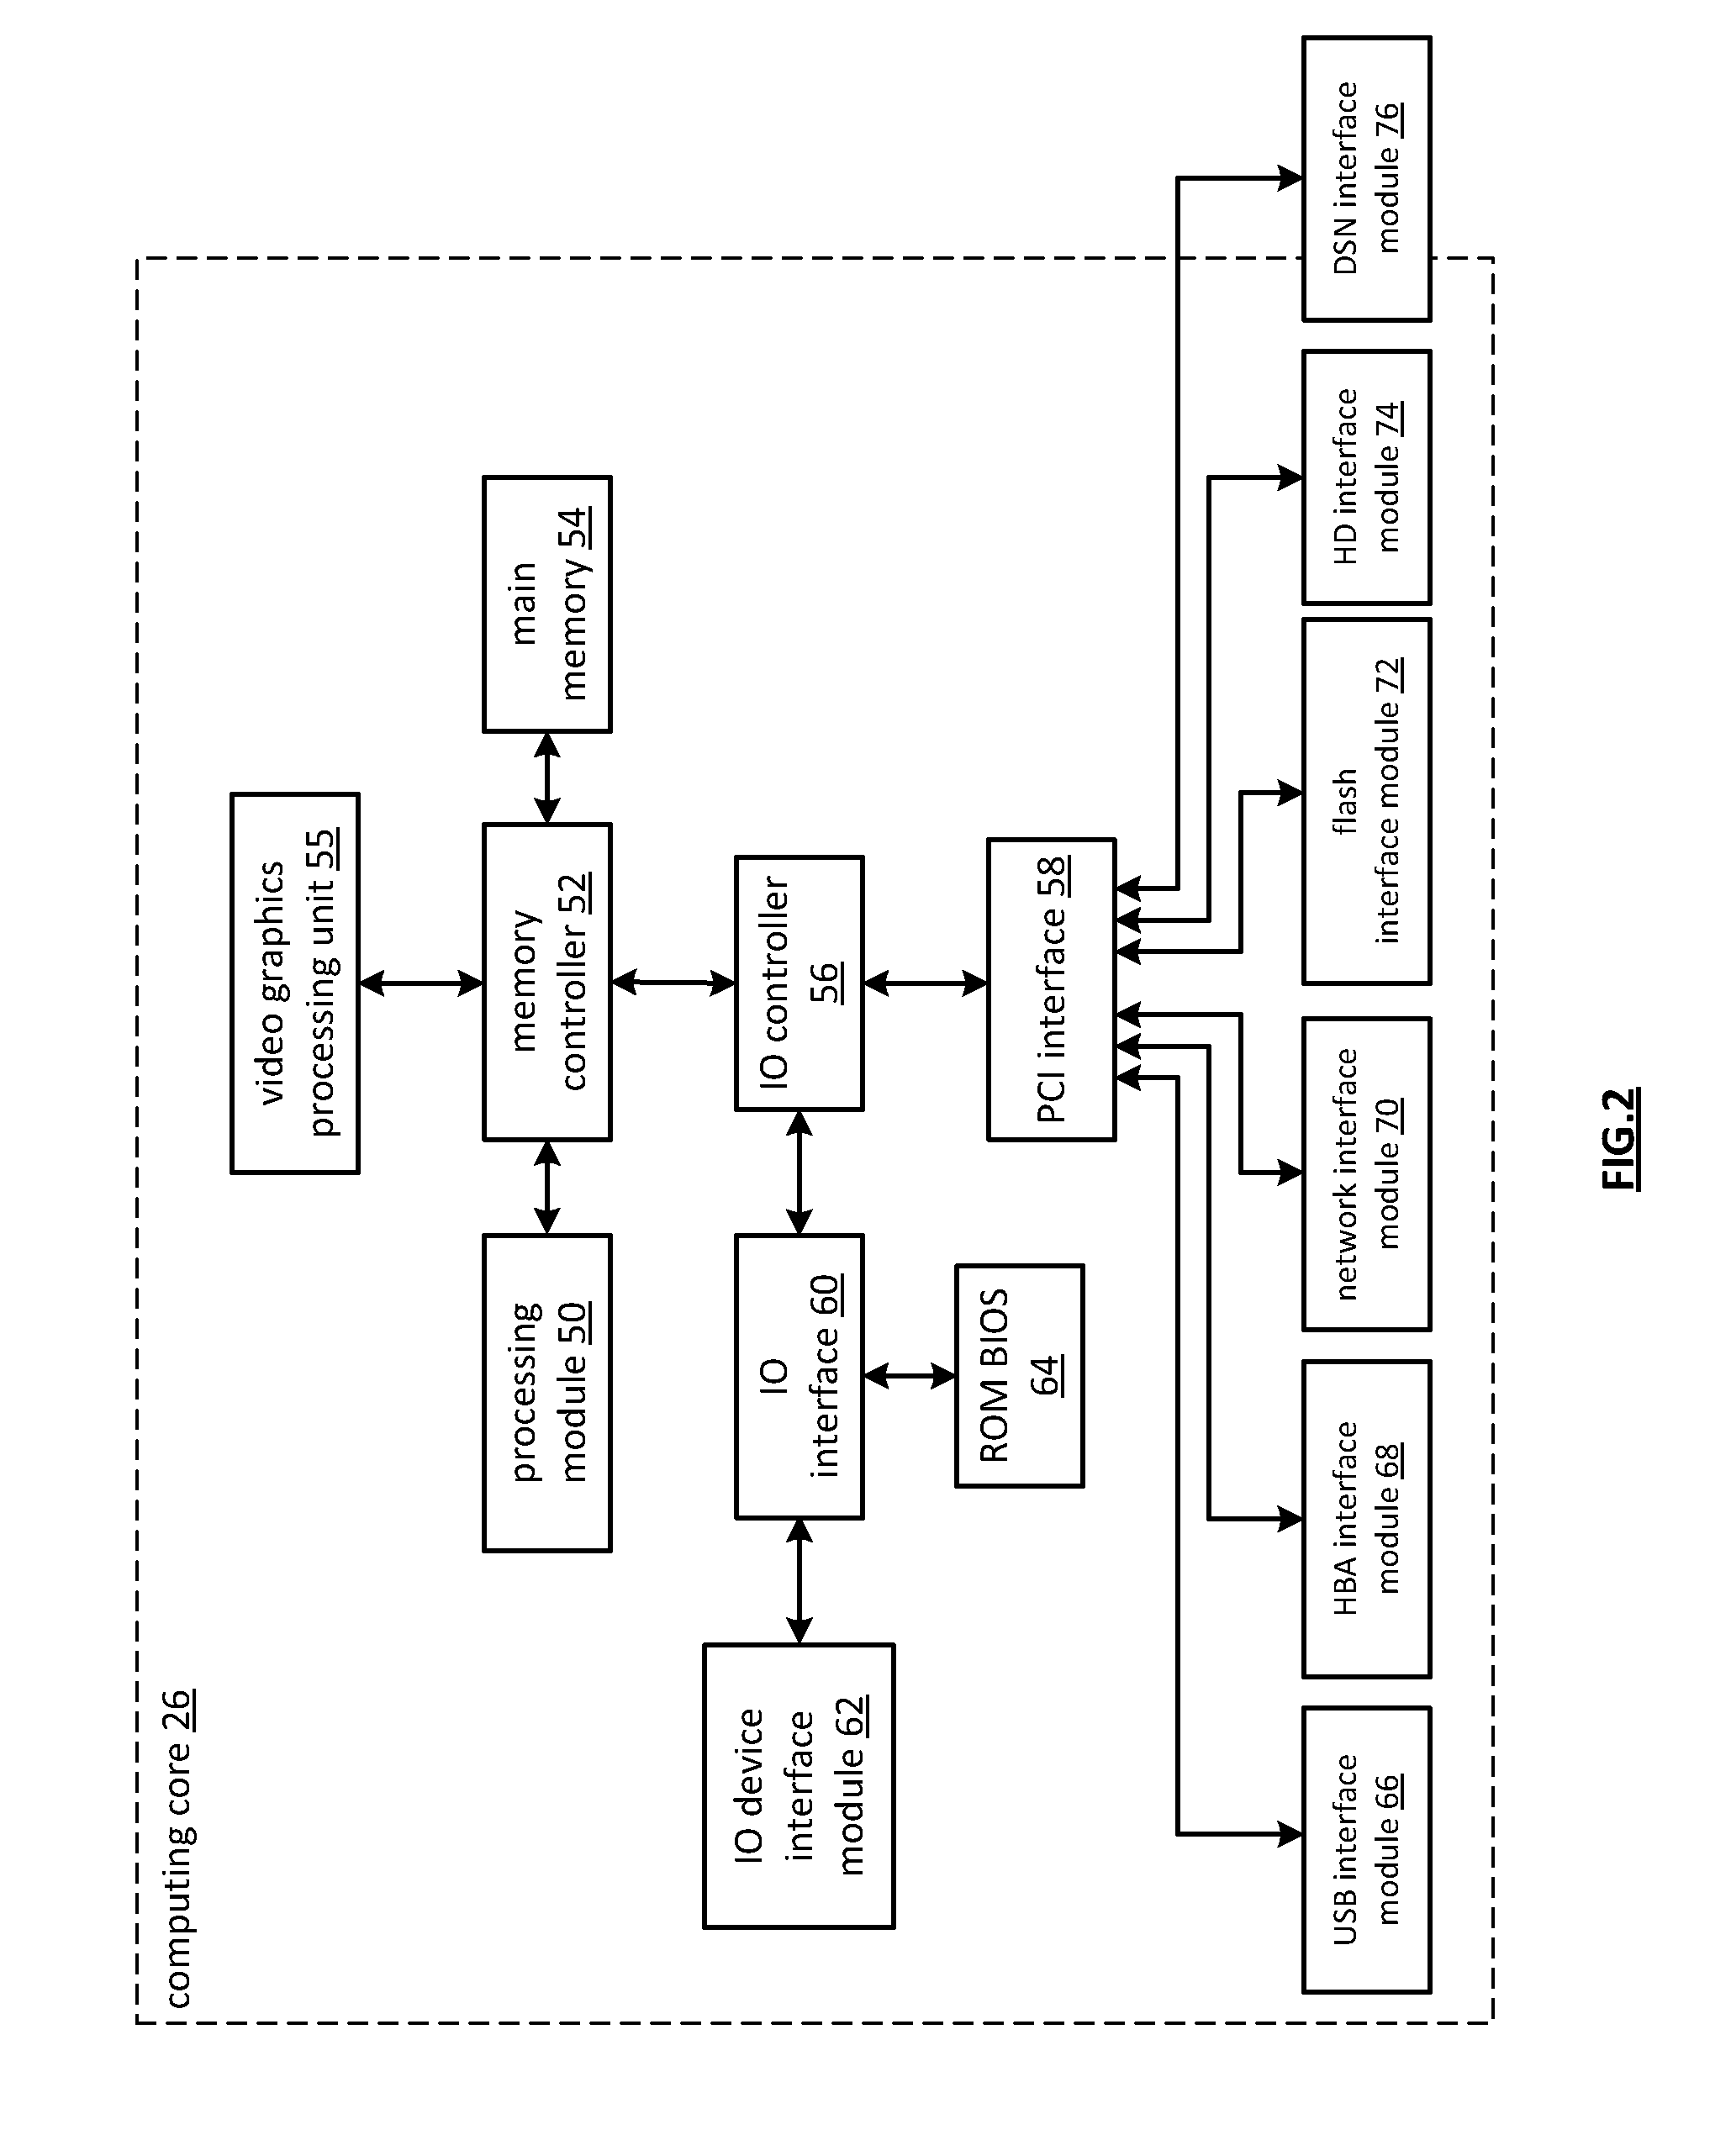 Storing data in multiple formats including a dispersed storage format